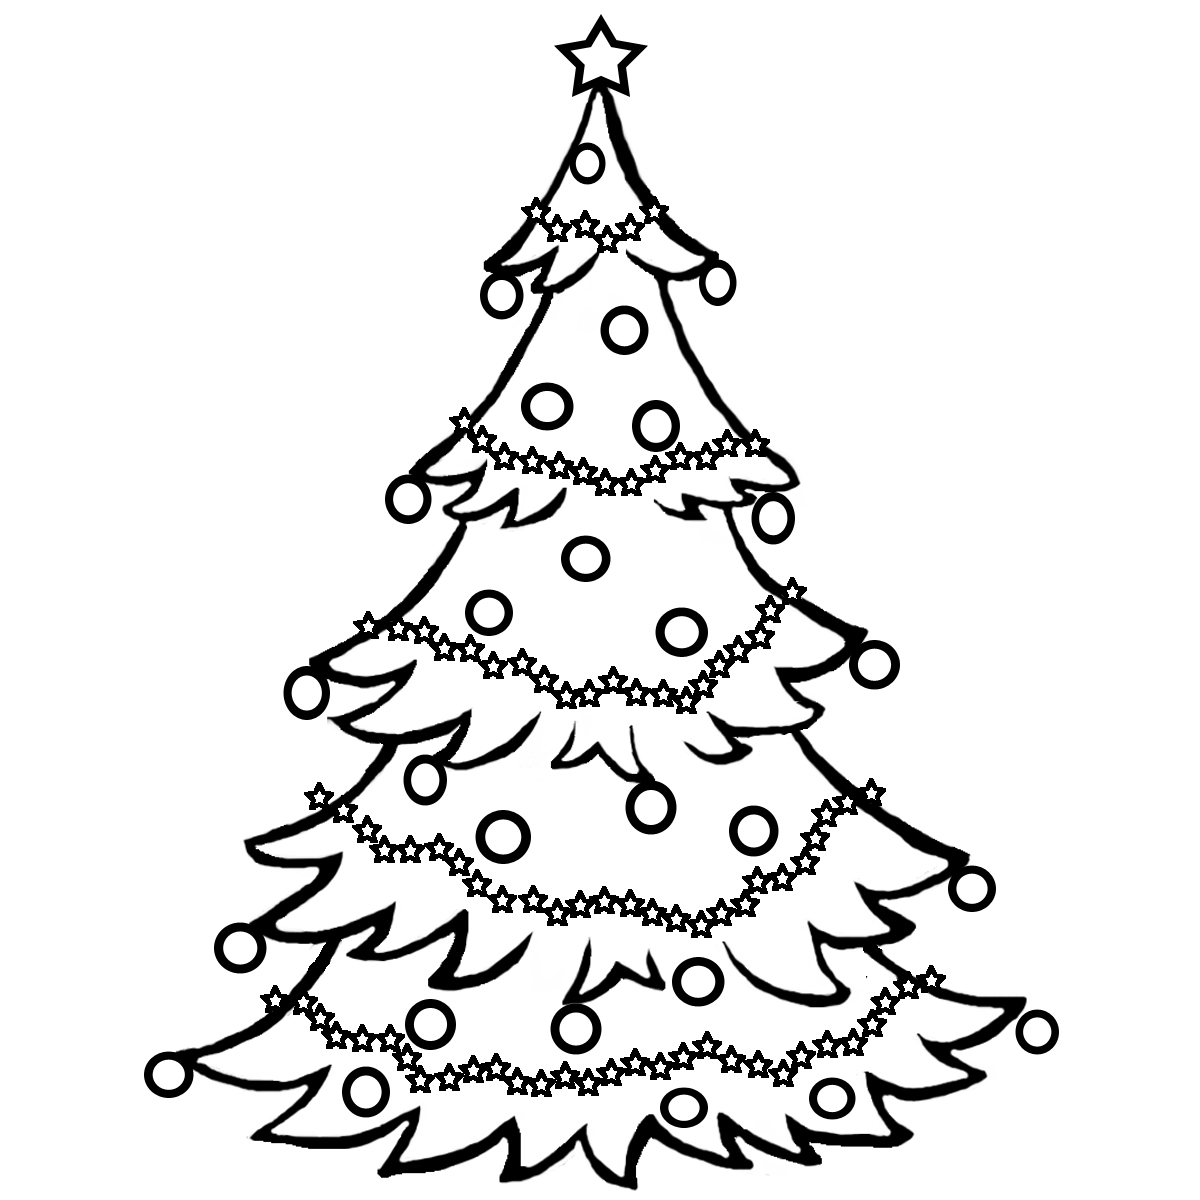 Christmas Line Drawings Archives - Coloring For Kids